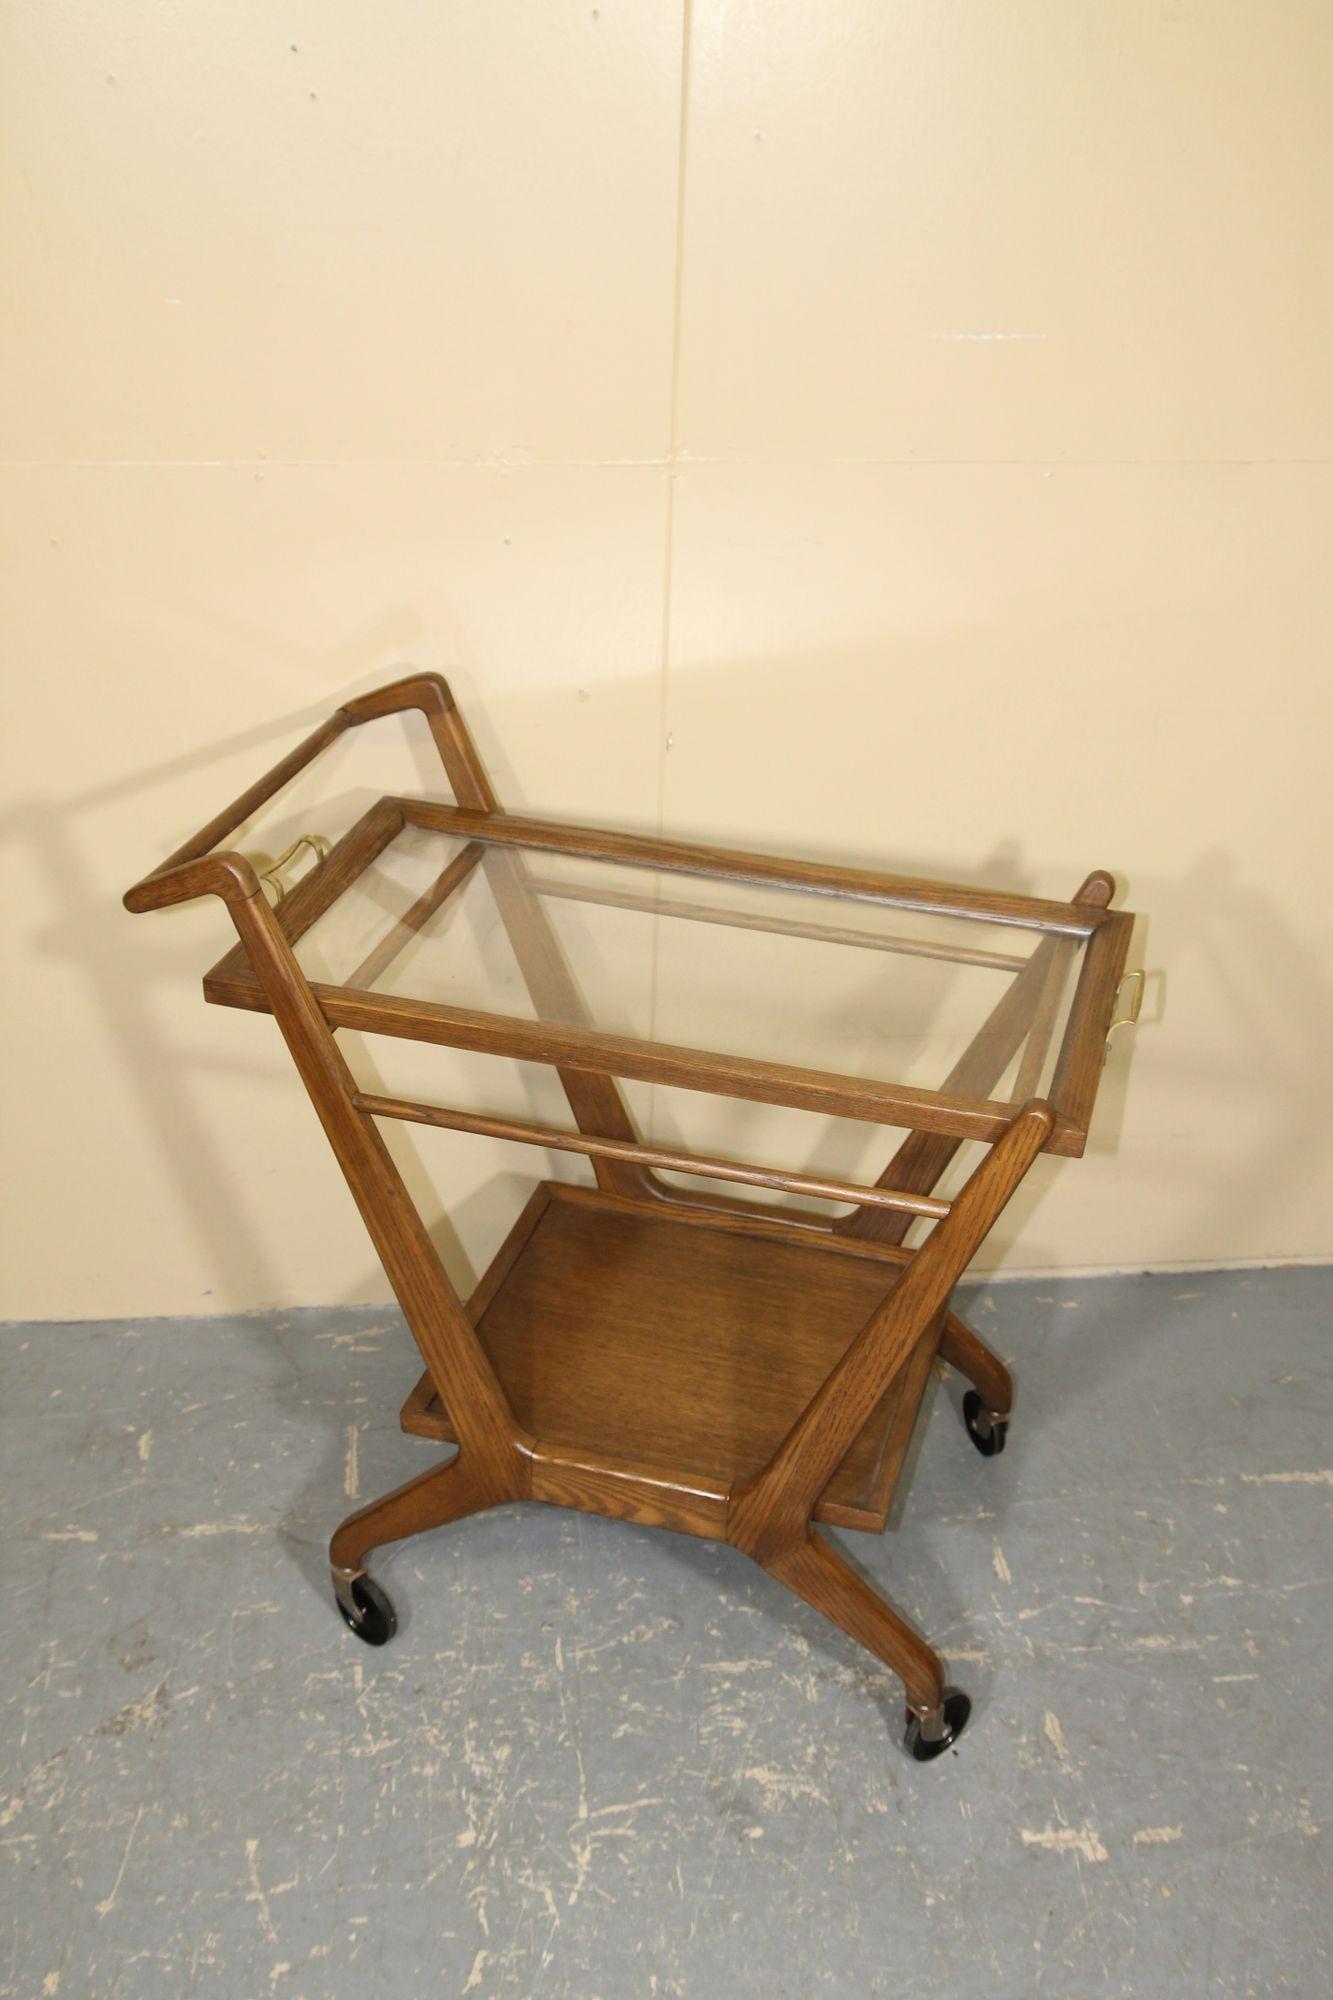 1950s Oak bar cart/tea trolley by Cesare Lacca for Cassina. This refinished cart has a removal top tray. Original wheels roll freely. I great simple cart that will look nice in any setting.